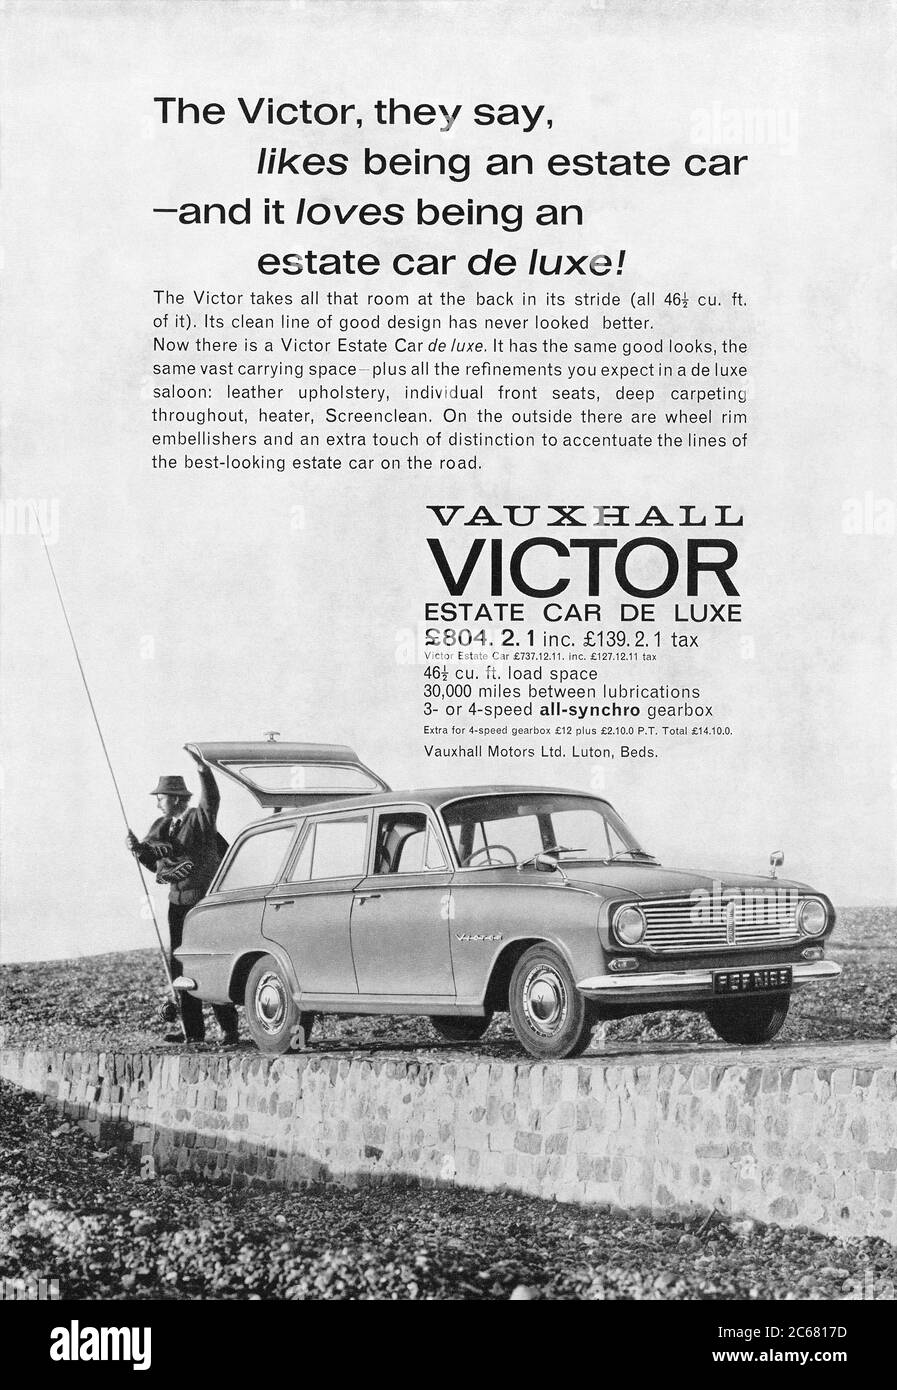 1963 British advertisement for the Vauxhall Victor estate car. Stock Photo